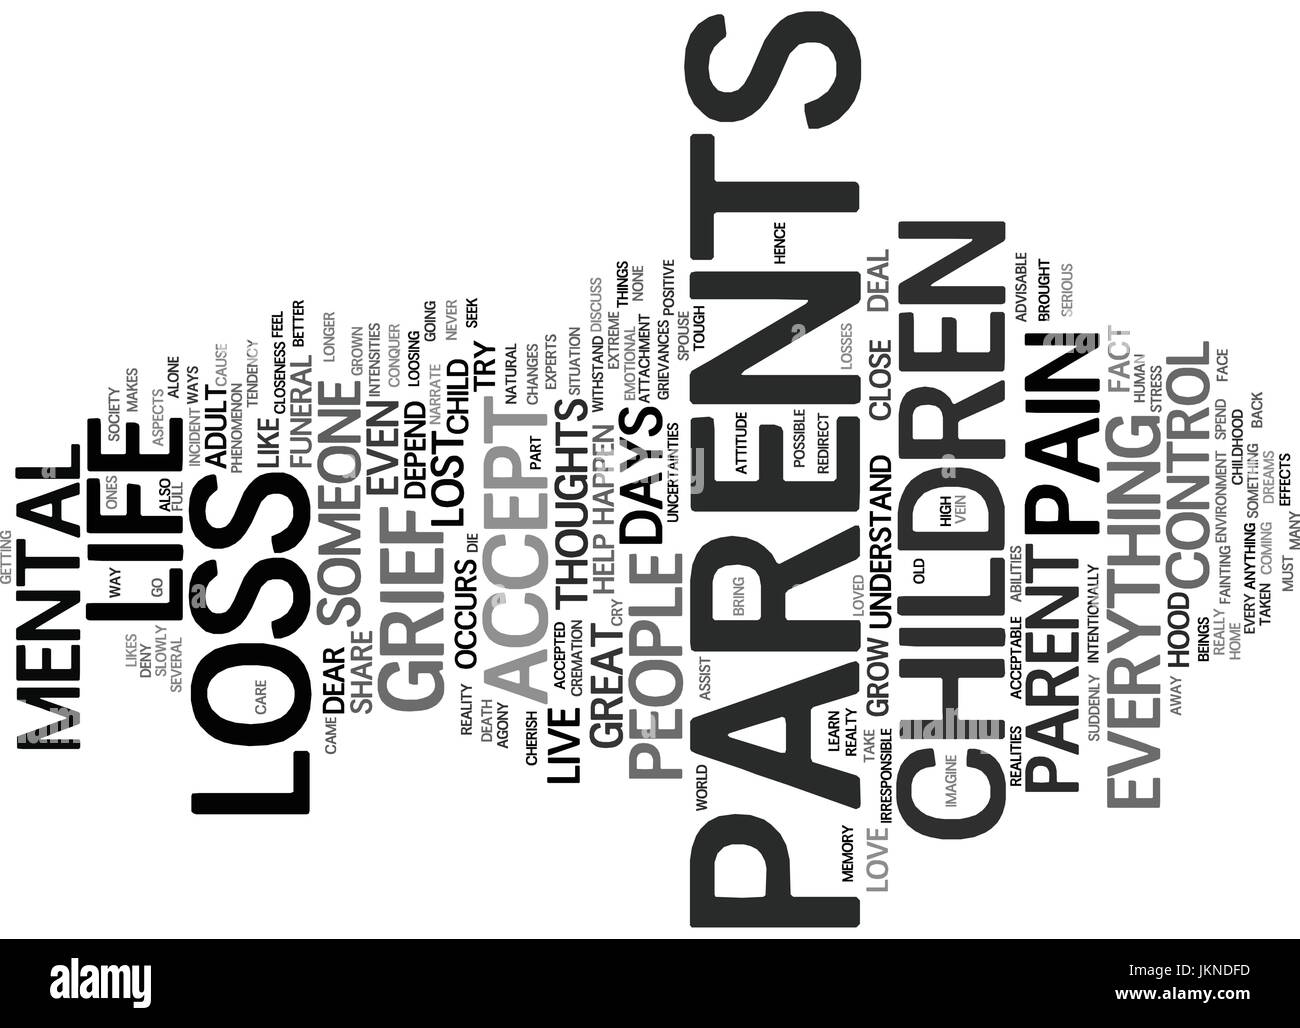 Loss Of A Parent How To Deal With The Grief Text Background Word Stock Vector Image Art Alamy